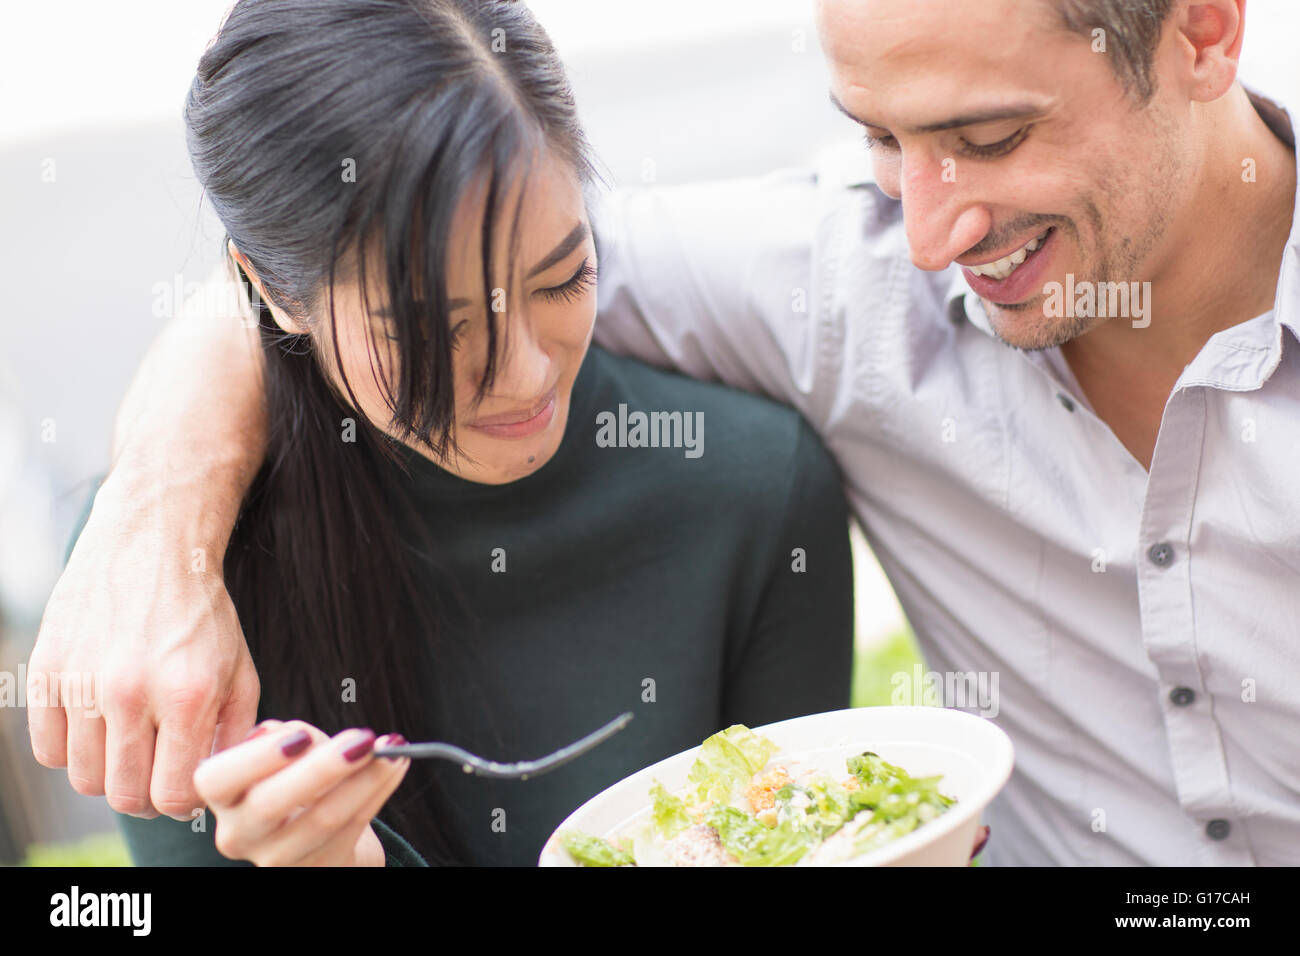 Couple sharing lunch looking down smiling Stock Photo